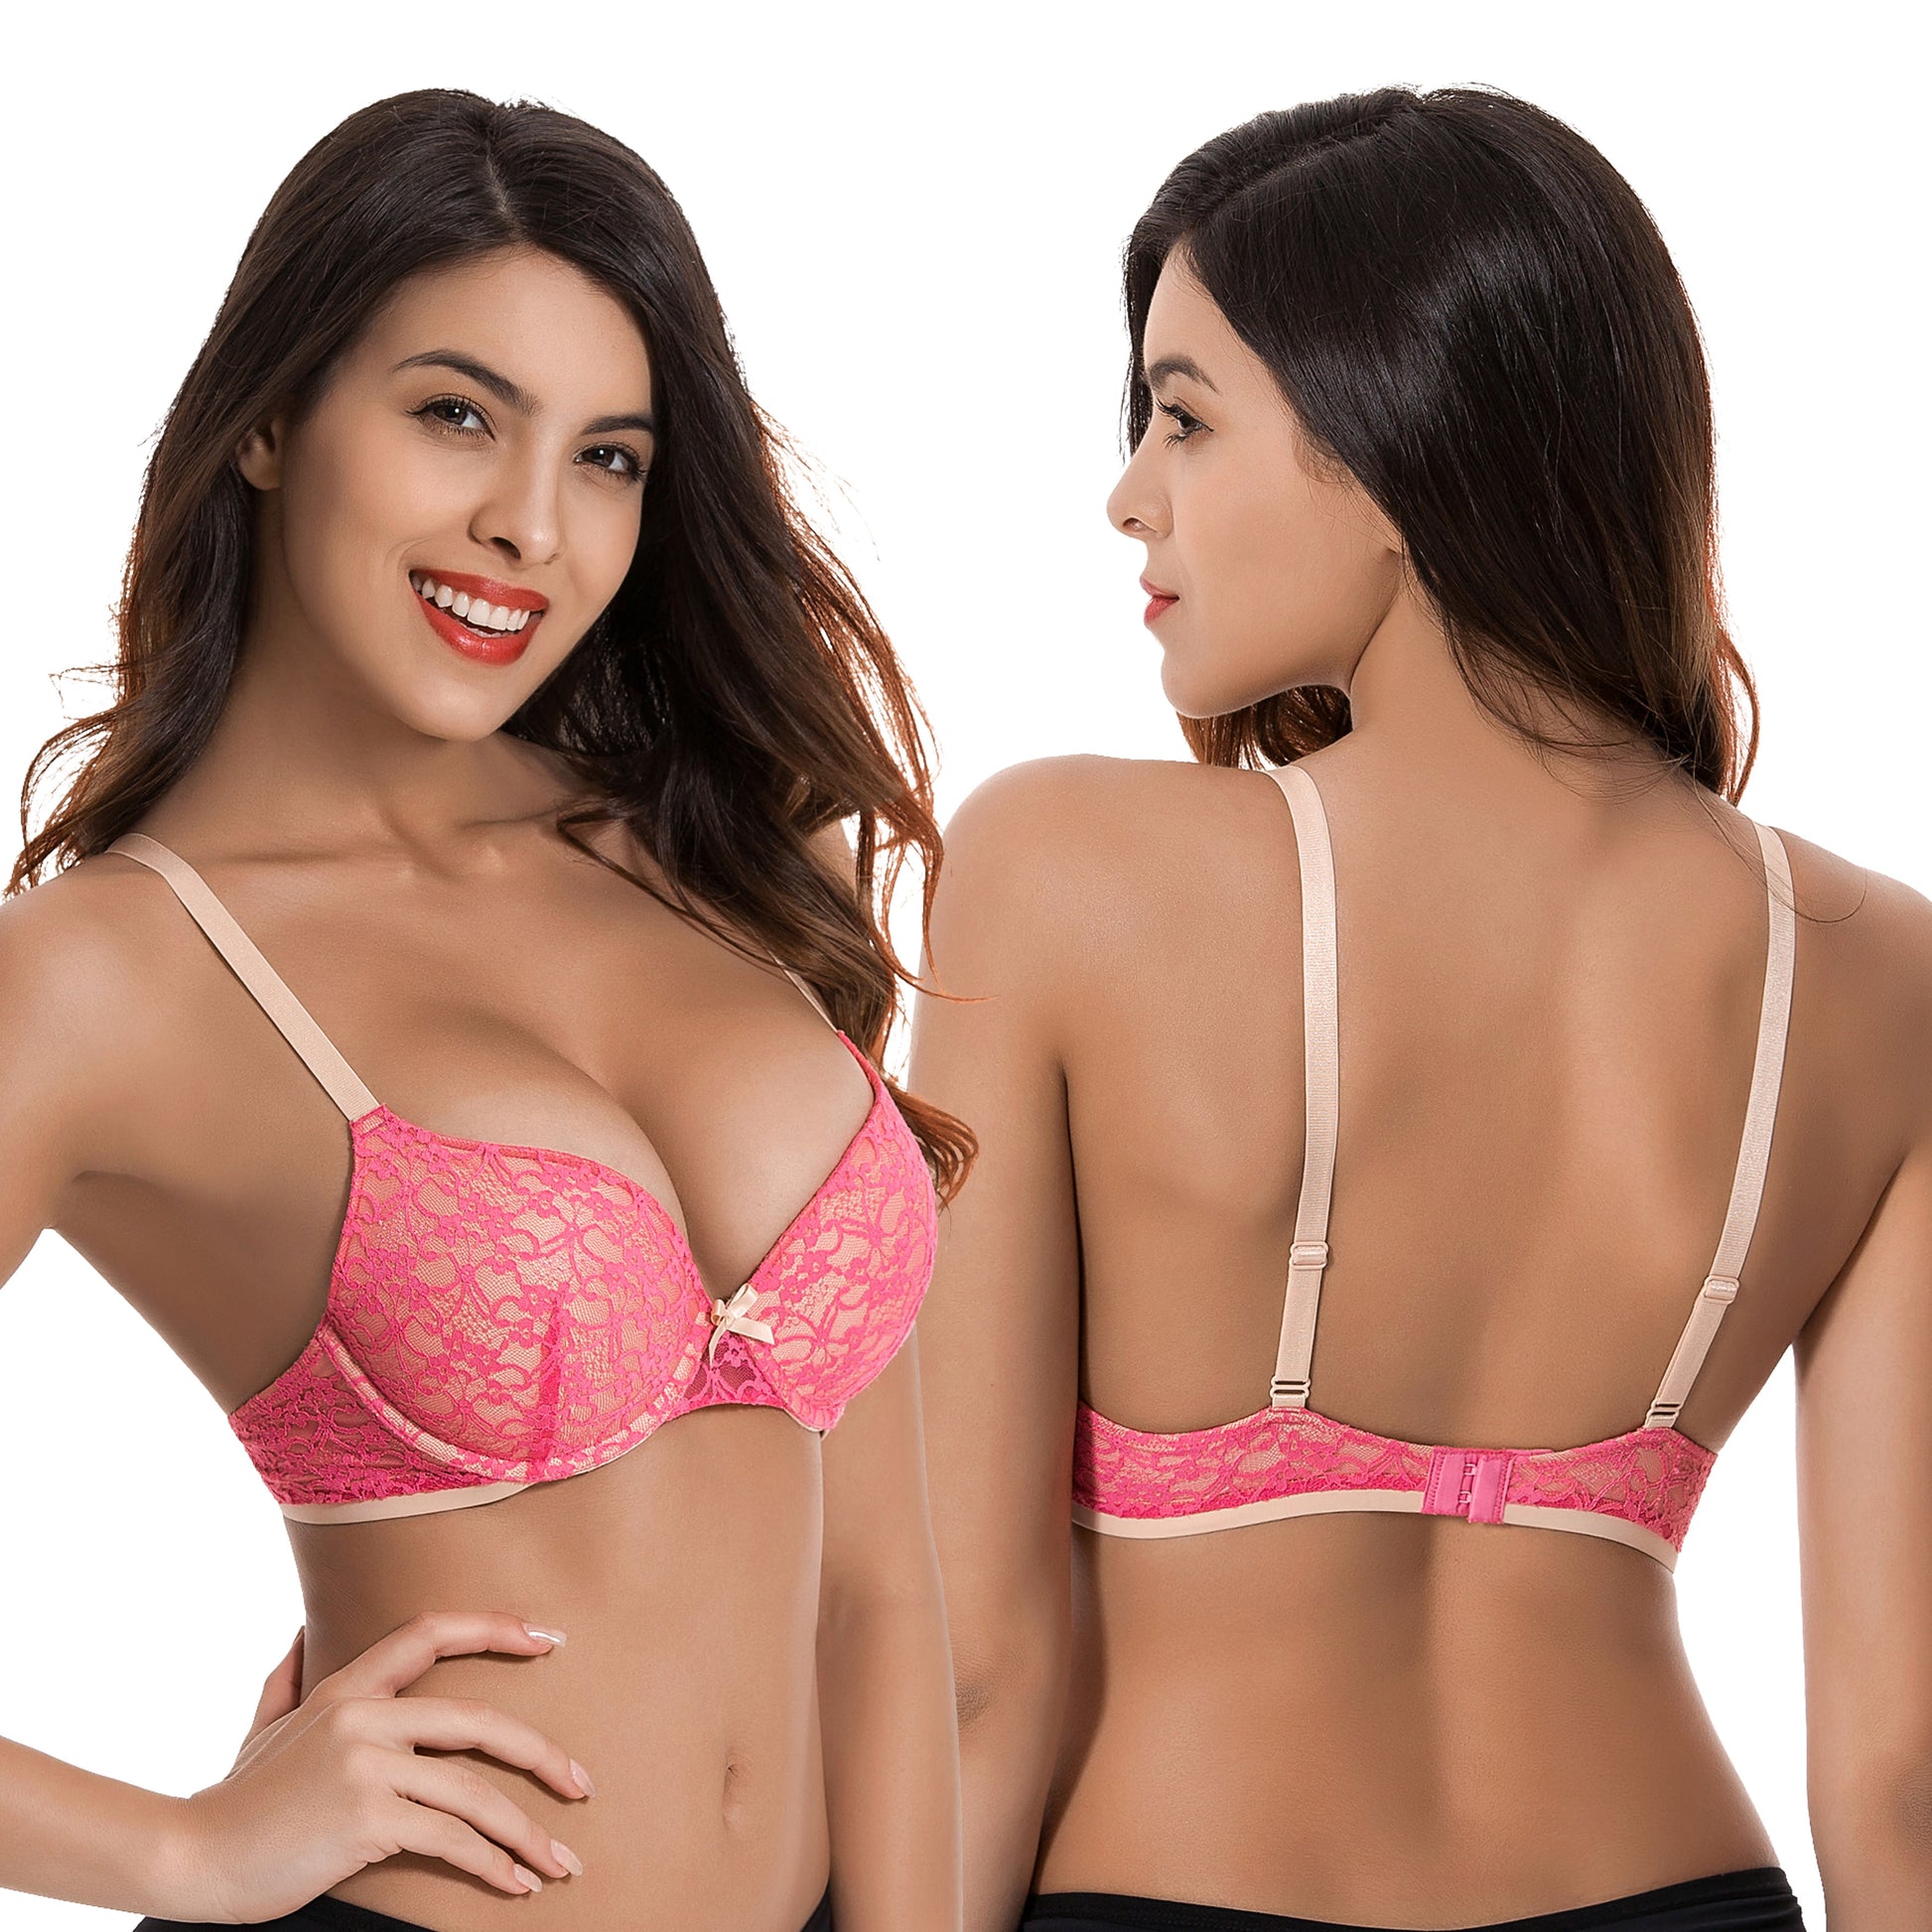 Curve Muse Women's Plus Size Push Up Add 1 Cup Underwire Perfect Shape Lace  Bras-2Pk-Black,Pink-34DDD